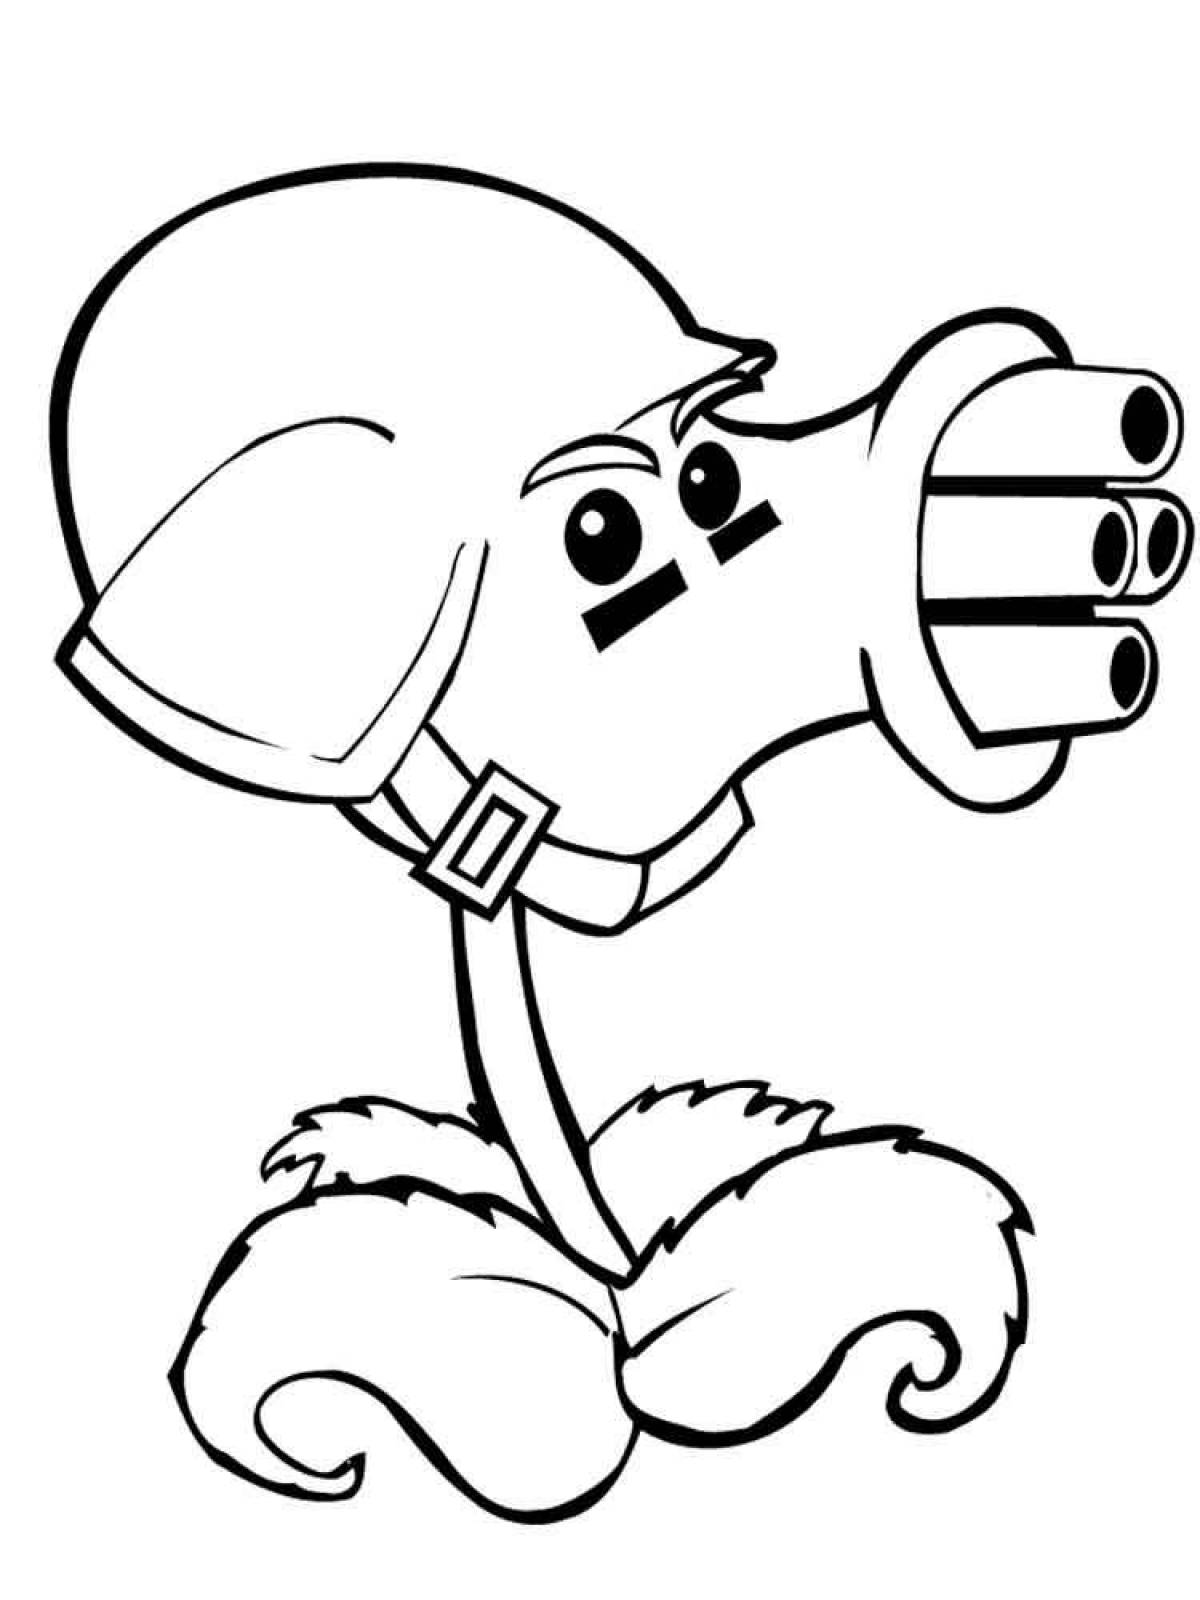 Amazing Plants vs Zombies 2 Coloring Pages